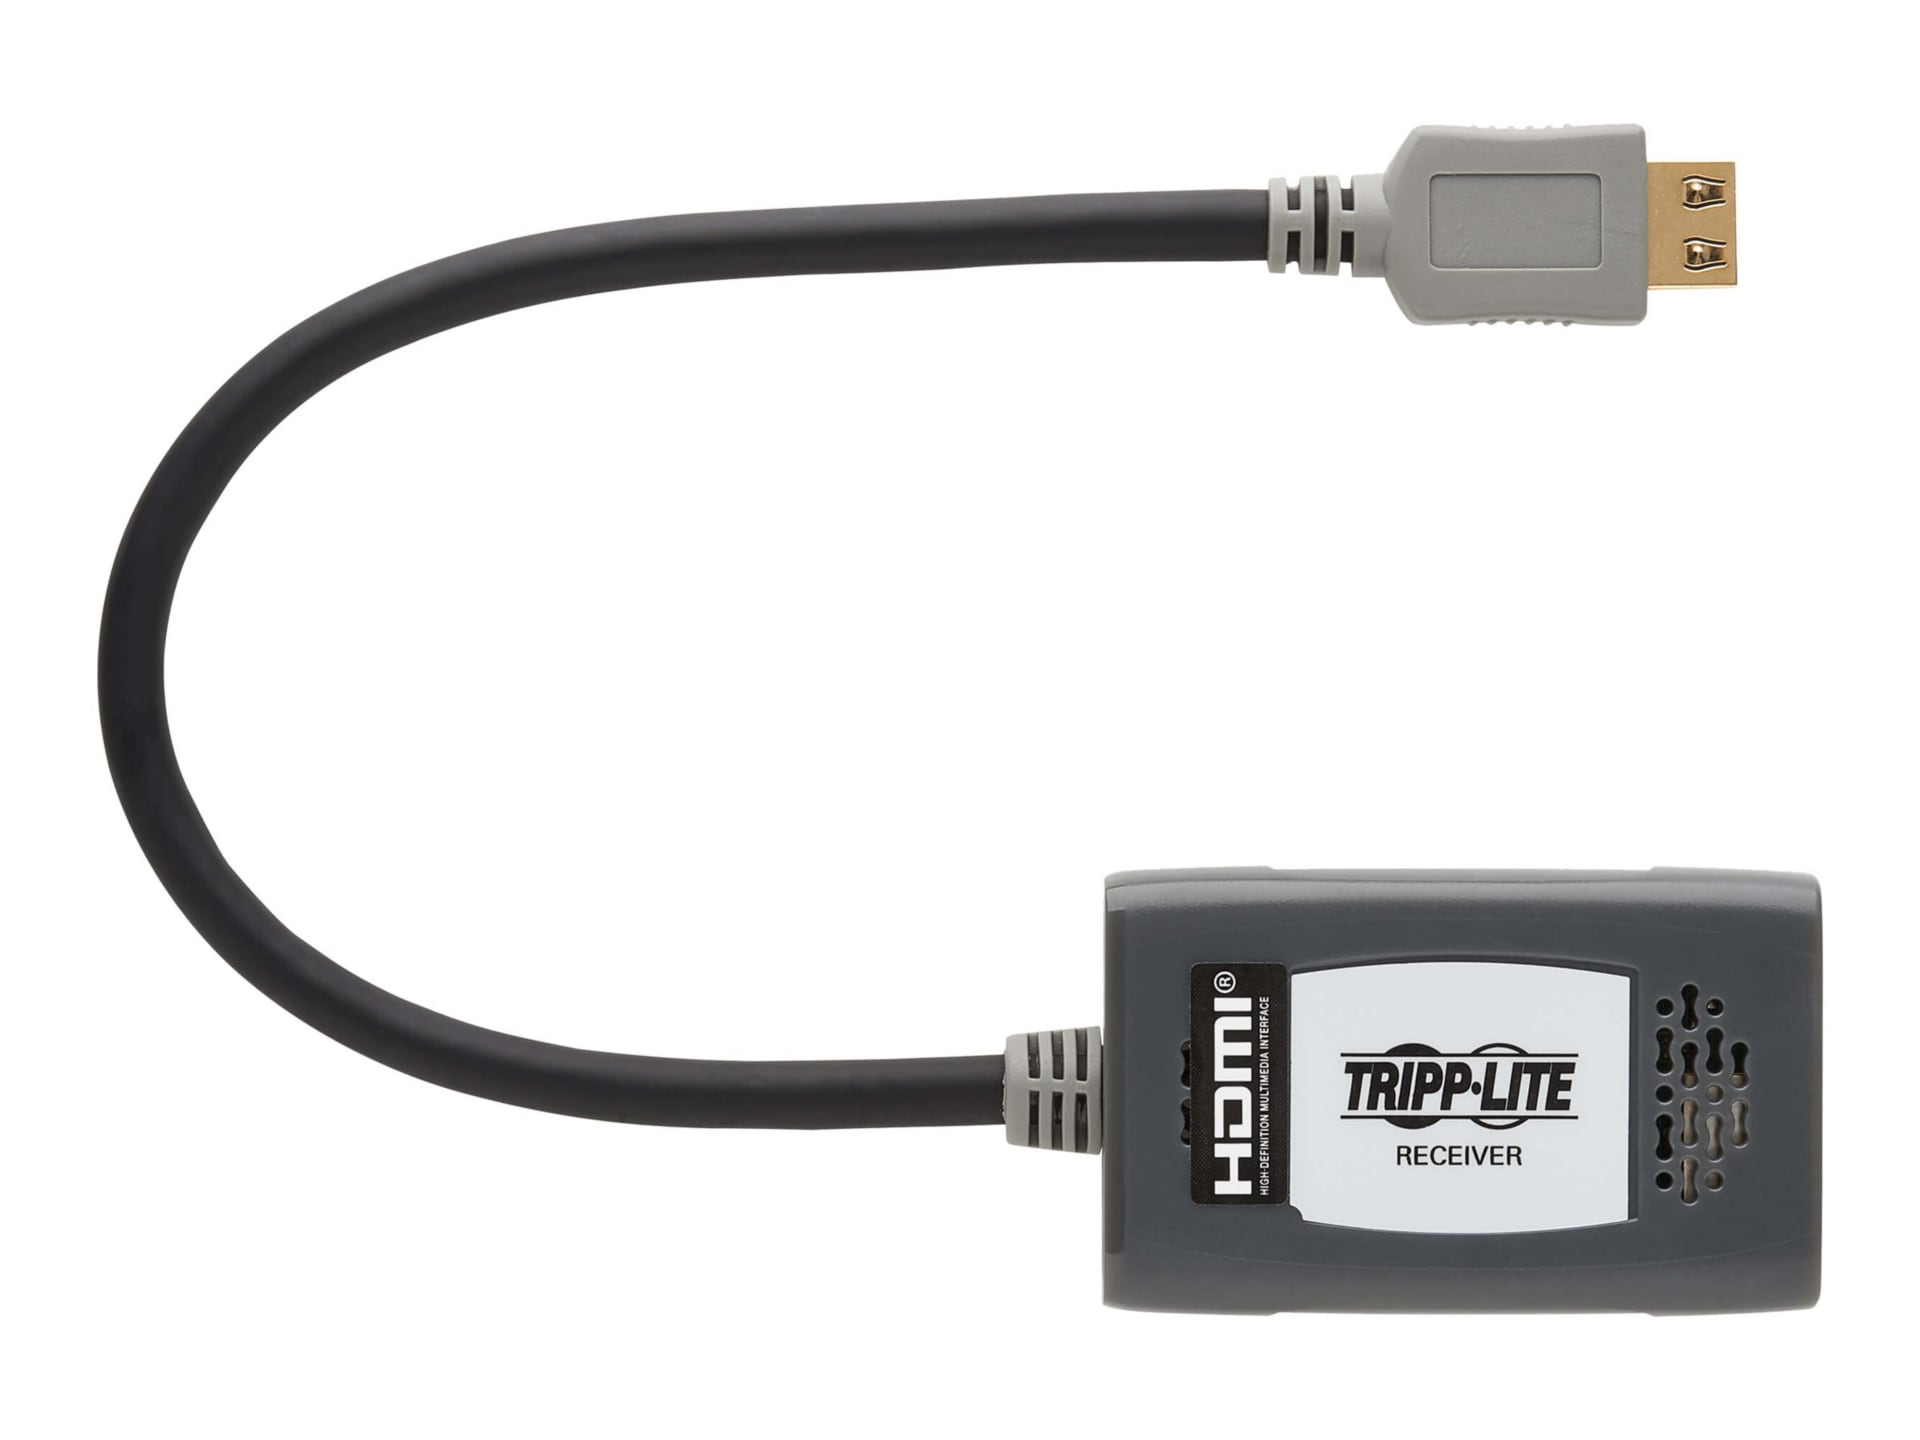 Tripp Lite HDMI over Cat6 Receiver 1-Port, Pigtail - 4K 60 Hz, HDR, 4:4:4, PoC, HDCP 2.2, 230 ft. (70.1 m), TAA -